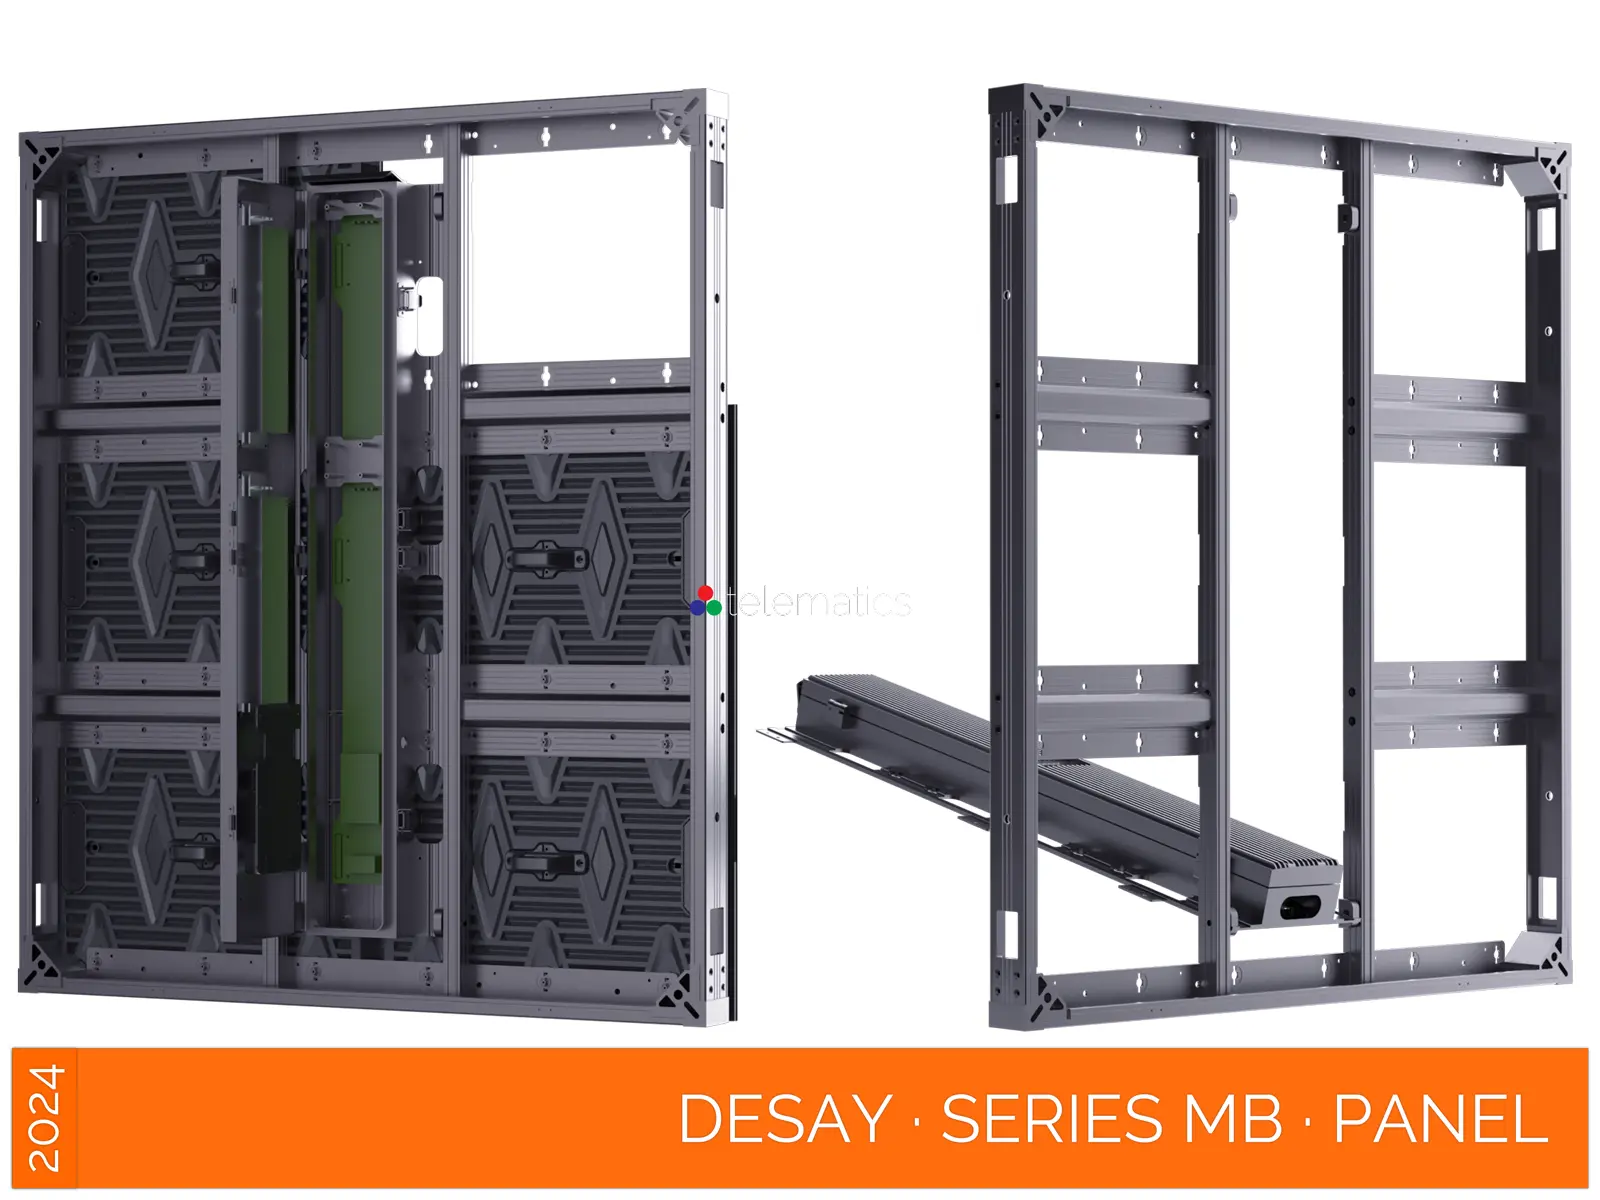 Desay · Series MB · Direct View LED Display Panel · Full Pixel Range · Installation · Digital Sign · Aluminum Extrusion Frame · Outdoor Rated · Easy Front Service · Power Box · NovaStar COEX MX CX · Vision Management Platform · Taurus · Viplex · review · price · cost · priced from $ 1,452 per square meter